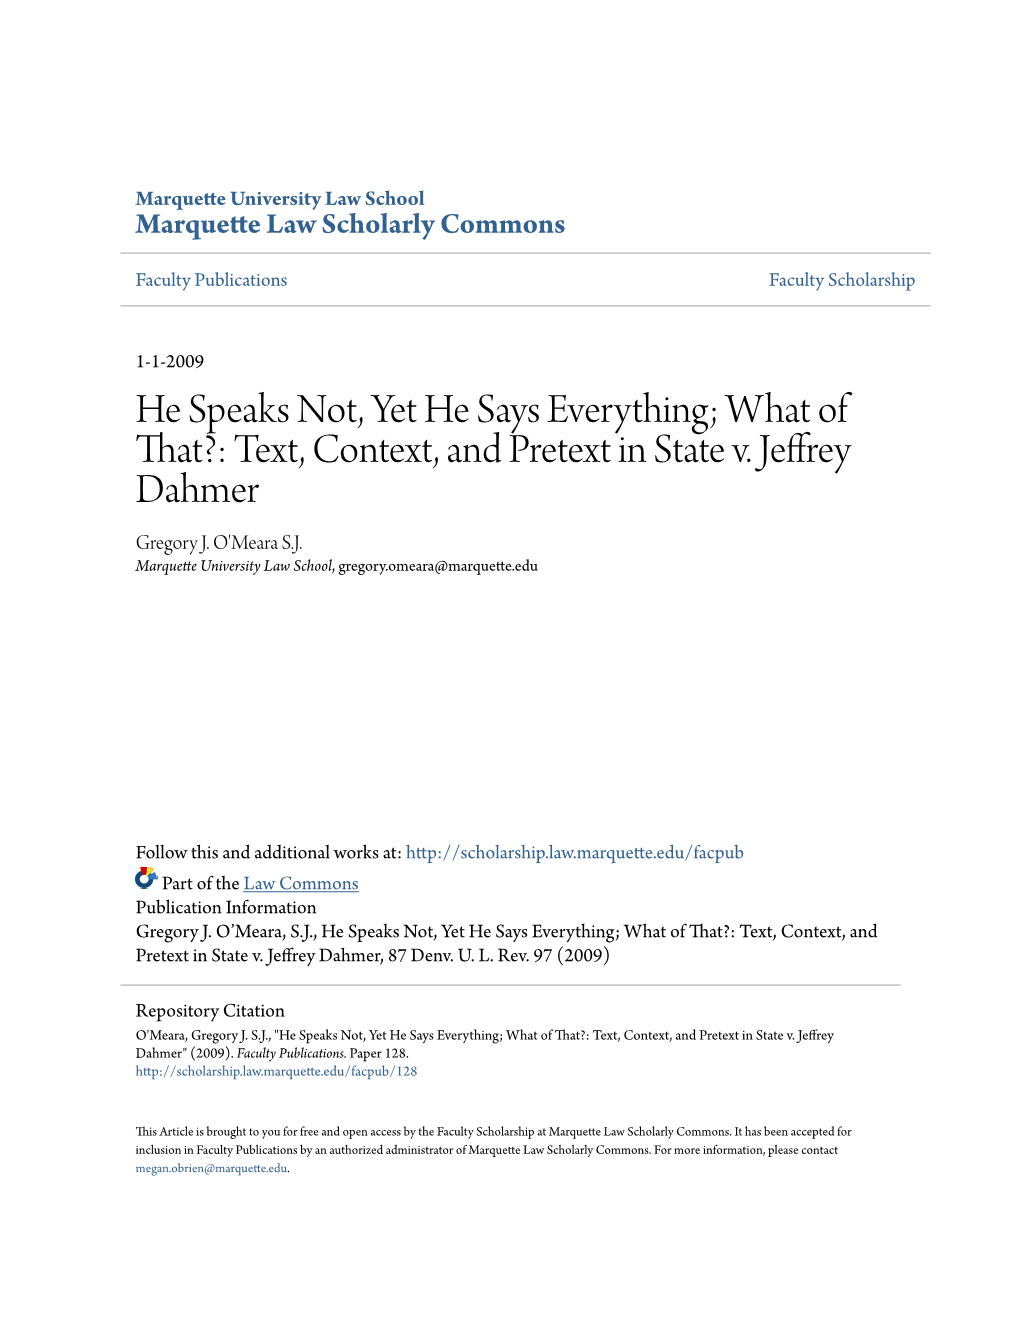 Text, Context, and Pretext in State V. Jeffrey Dahmer Gregory J